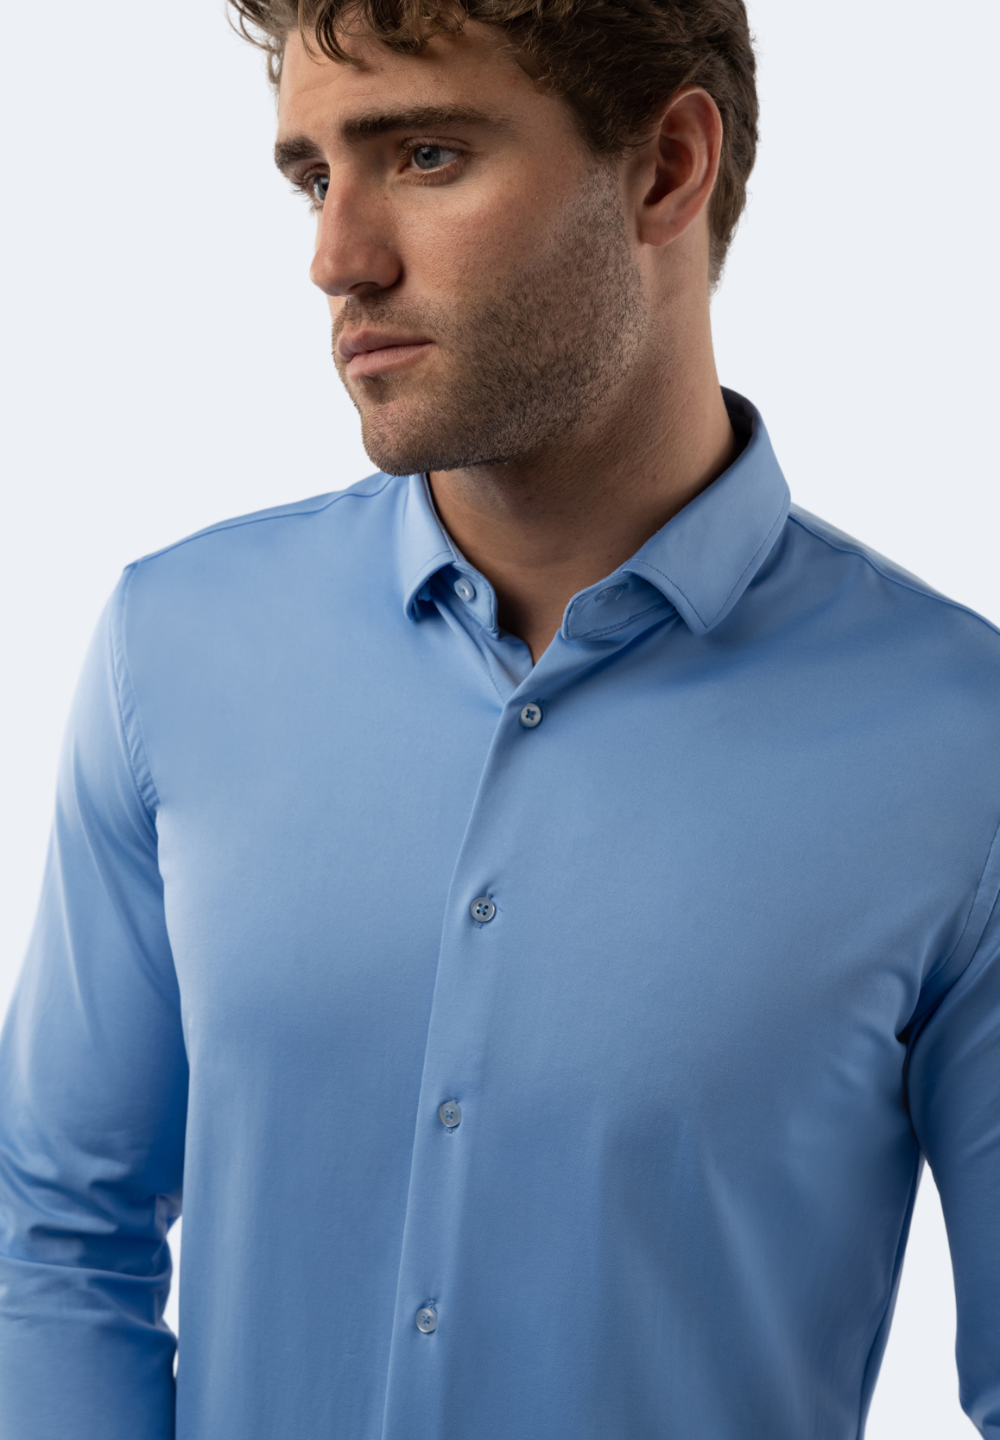 Baby Blue Solid Shirt